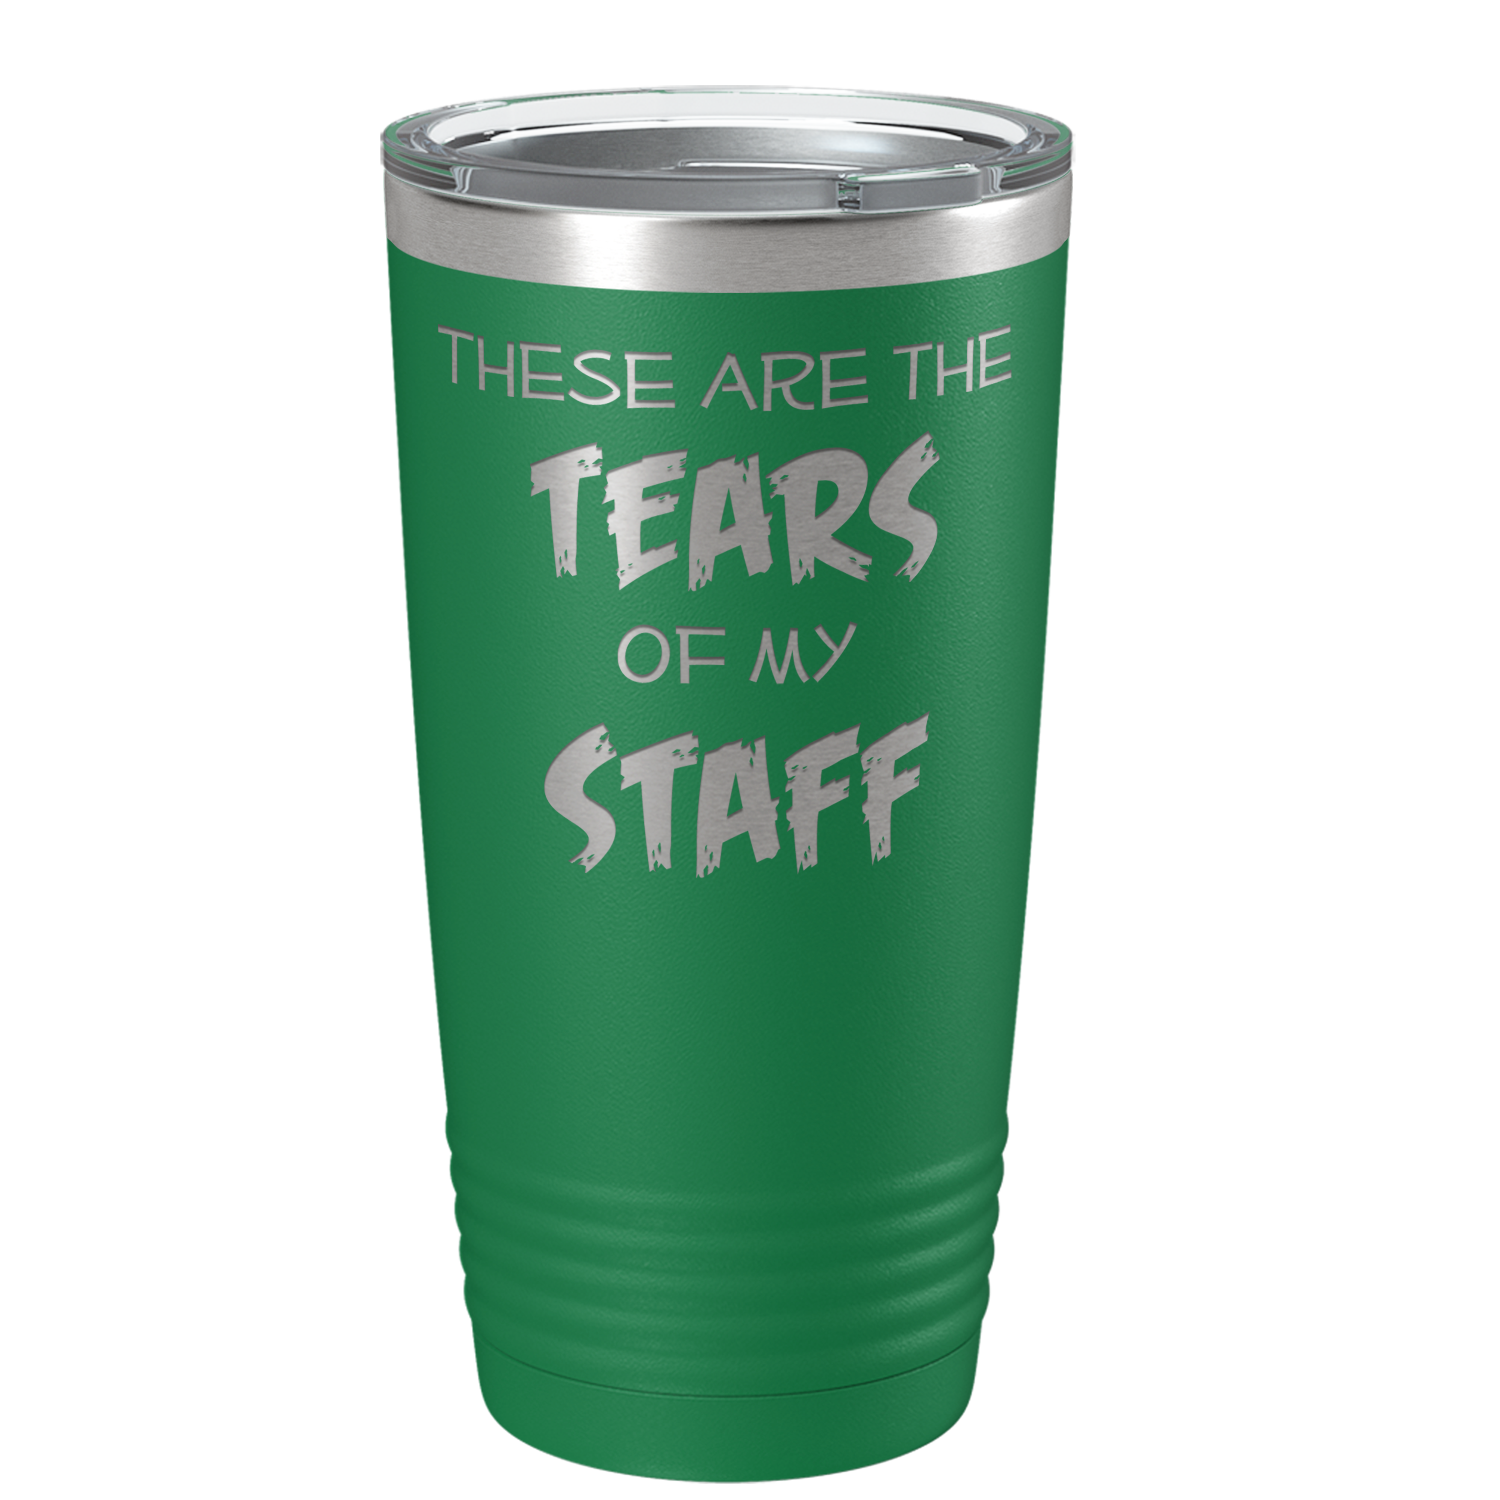 These are Tears of my Staff on Green 20 oz Stainless Steel Ringneck Tumbler